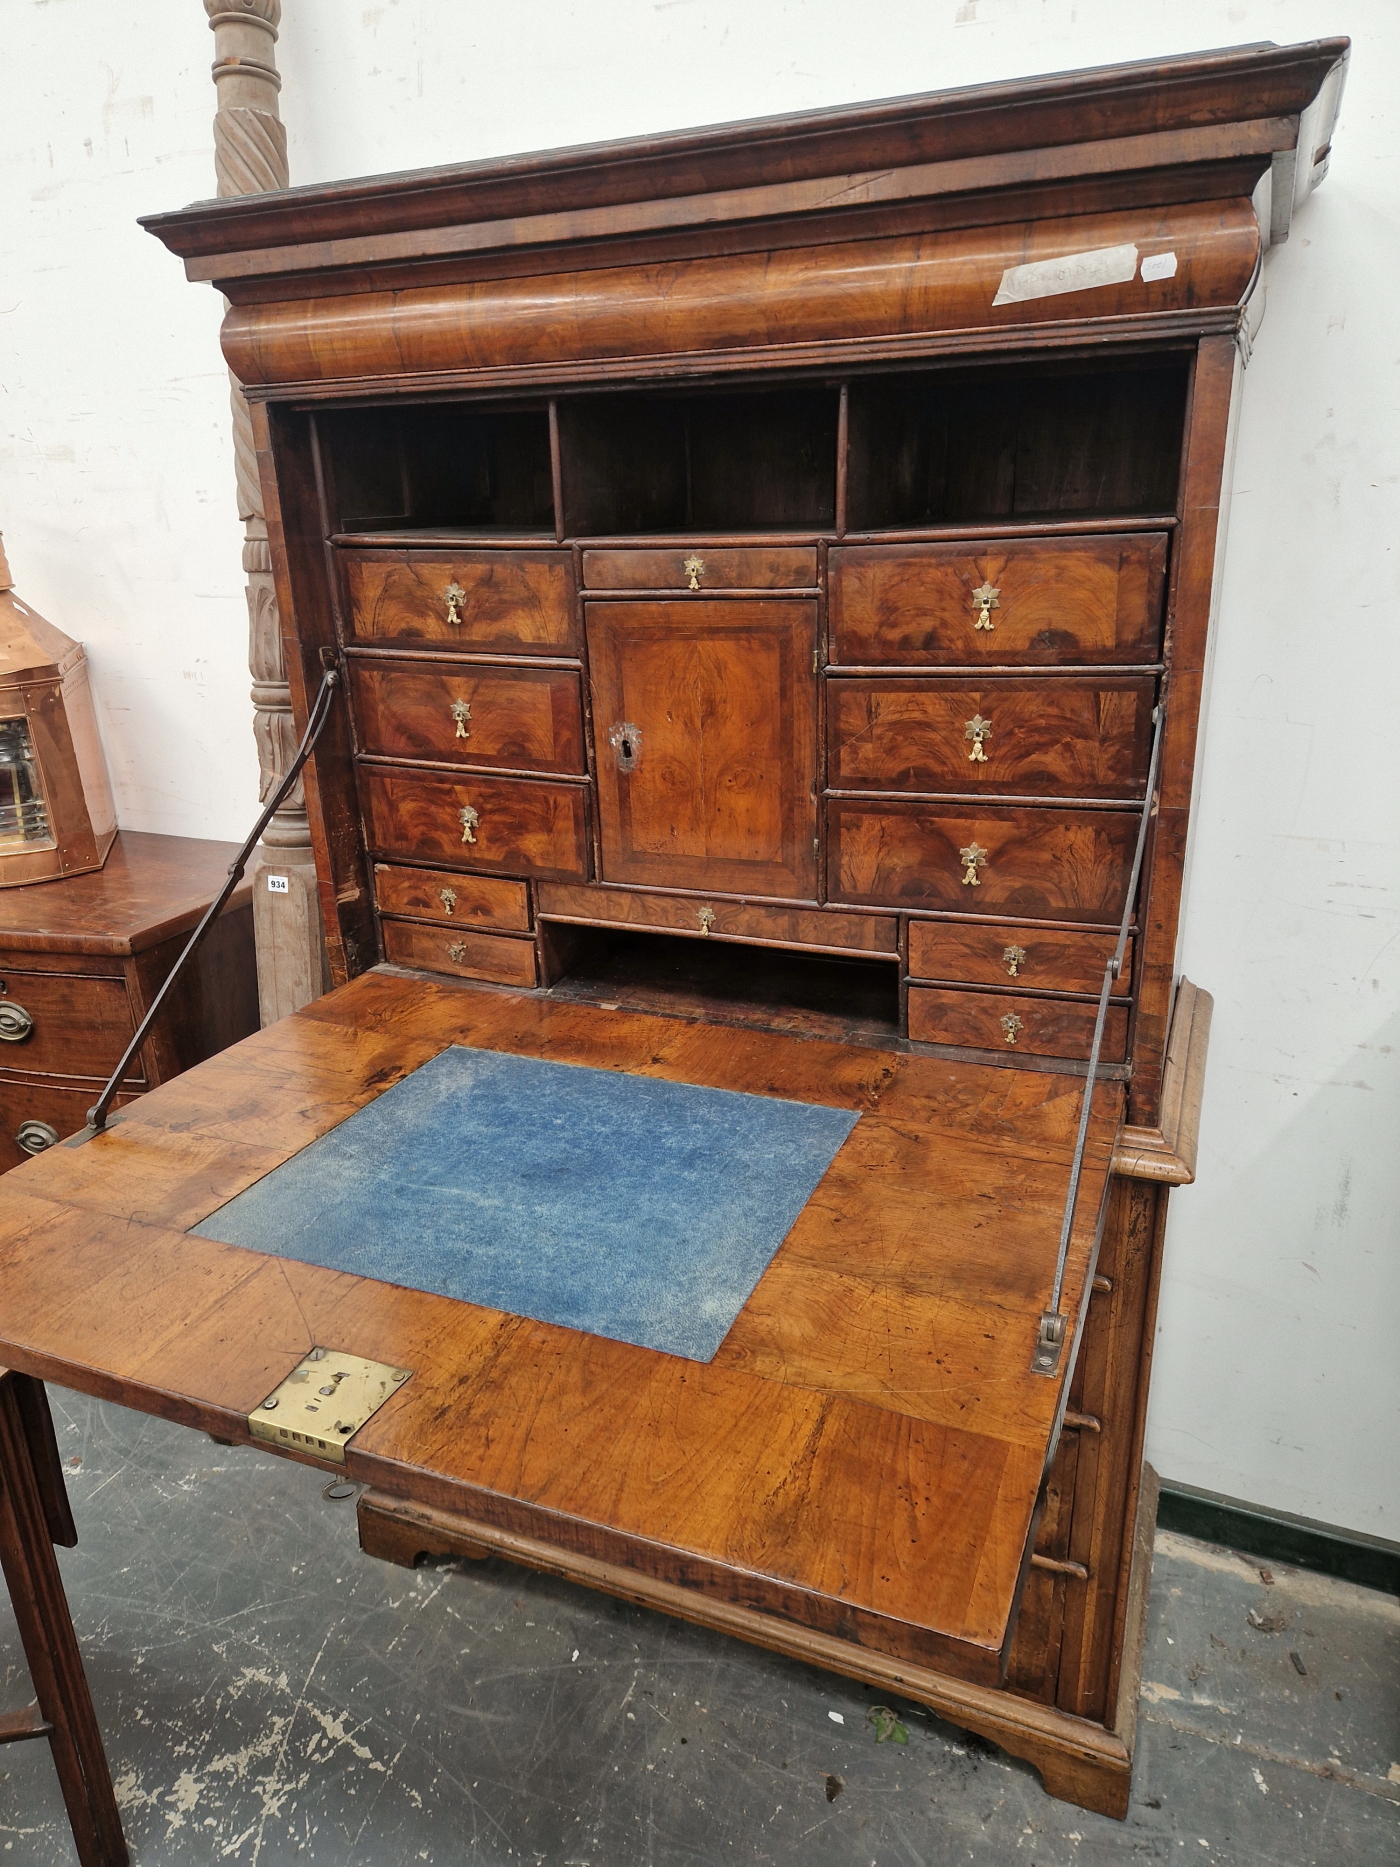 AN EARLY 18th C. WALNUT DROP FRONT BUREAU CHEST, AN OVOLO FRONT DRAWER ABOVE THE FALL, THE BASE WITH - Image 3 of 9